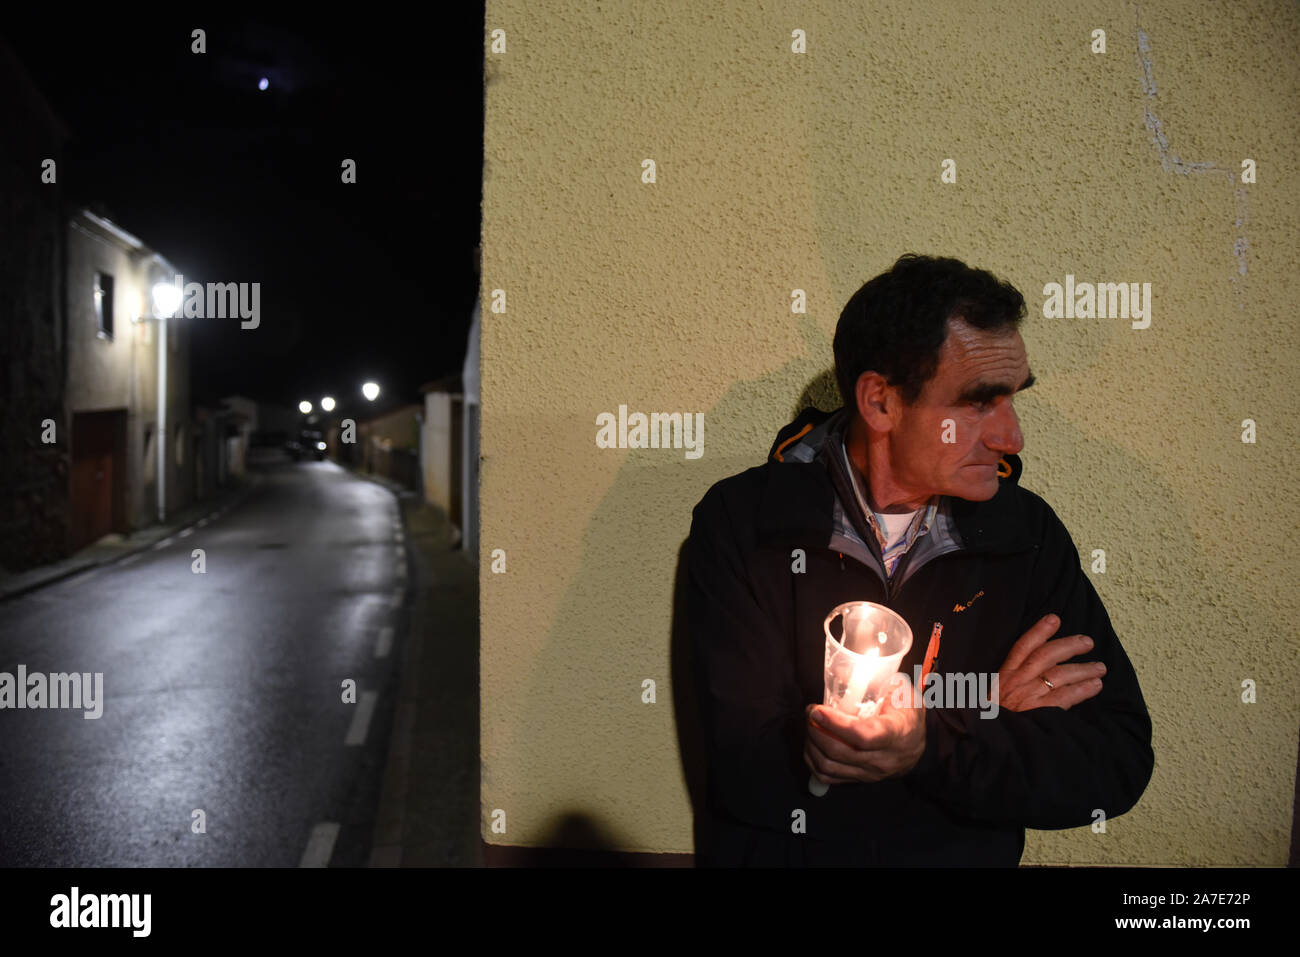 A man holds a candle at the side of the street during the festival.Dozens of men of Tanjueco north of Spain gathered on the streets of this small village during the celebrations of All Saint's Day. Villagers divided into two groups: single and married, sang 'Cantos de las Ánimas' (Songs of Souls) to accompany the souls during their 'way' from Purgatory to the Heaven. It is a medieval and unique tradition around the world. Stock Photo